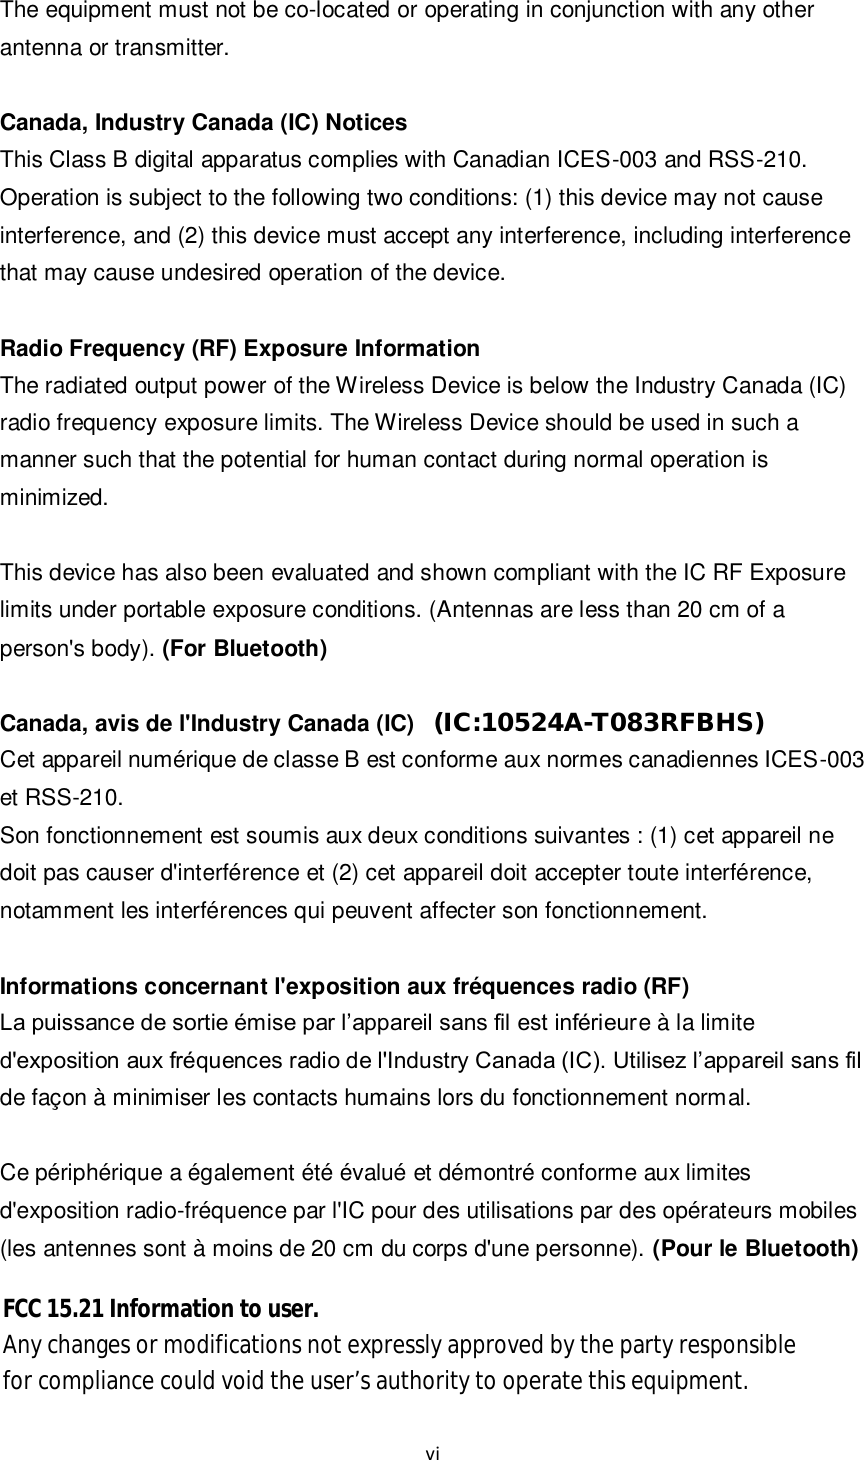 vi  The equipment must not be co-located or operating in conjunction with any other antenna or transmitter.  Canada, Industry Canada (IC) Notices   This Class B digital apparatus complies with Canadian ICES-003 and RSS-210.   Operation is subject to the following two conditions: (1) this device may not cause interference, and (2) this device must accept any interference, including interference that may cause undesired operation of the device.  Radio Frequency (RF) Exposure Information   The radiated output power of the Wireless Device is below the Industry Canada (IC) radio frequency exposure limits. The Wireless Device should be used in such a manner such that the potential for human contact during normal operation is minimized.    This device has also been evaluated and shown compliant with the IC RF Exposure limits under portable exposure conditions. (Antennas are less than 20 cm of a person&apos;s body). (For Bluetooth)  Canada, avis de l&apos;Industry Canada (IC) Cet appareil numérique de classe B est conforme aux normes canadiennes ICES-003 et RSS-210. Son fonctionnement est soumis aux deux conditions suivantes : (1) cet appareil ne doit pas causer d&apos;interférence et (2) cet appareil doit accepter toute interférence, notamment les interférences qui peuvent affecter son fonctionnement.  Informations concernant l&apos;exposition aux fréquences radio (RF) La puissance de sortie émise par l’appareil sans fil est inférieure à la limite d&apos;exposition aux fréquences radio de l&apos;Industry Canada (IC). Utilisez l’appareil sans fil de façon à minimiser les contacts humains lors du fonctionnement normal.    Ce périphérique a également été évalué et démontré conforme aux limites d&apos;exposition radio-fréquence par l&apos;IC pour des utilisations par des opérateurs mobiles (les antennes sont à moins de 20 cm du corps d&apos;une personne). (Pour le Bluetooth)     (IC:10524A-T083RFBHS)FCC 15.21 Information to user.Any changes or modifications not expressly approved by the party responsiblefor compliance could void the user’s authority to operate this equipment.